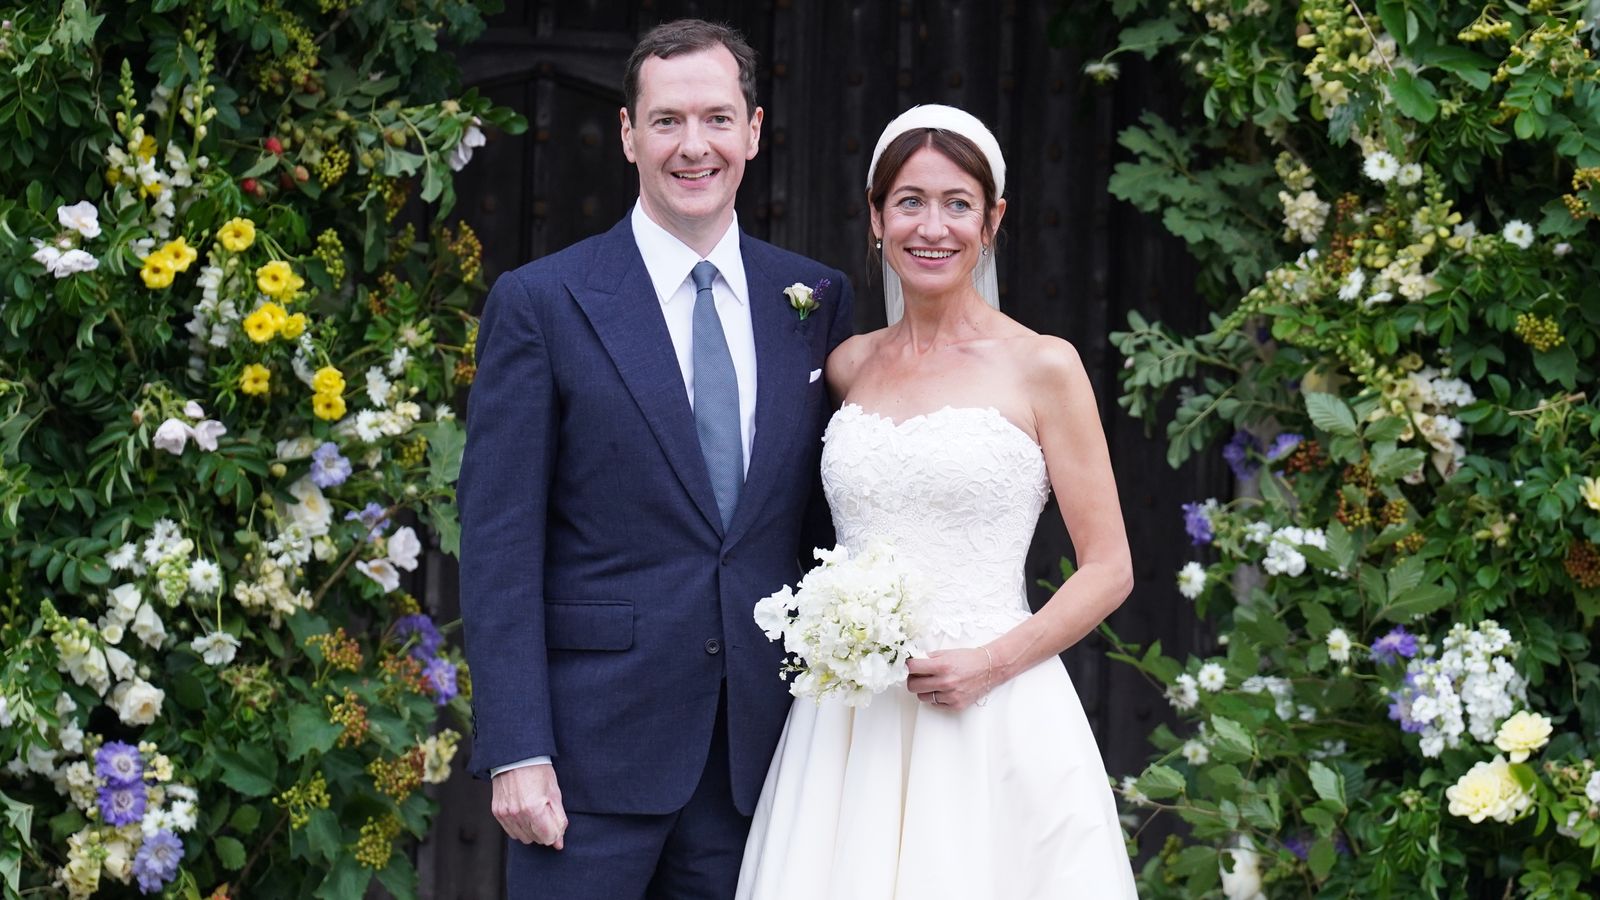 George Osborne 'really upset' by 'poison pen' email as he marries former adviser Thea Rogers